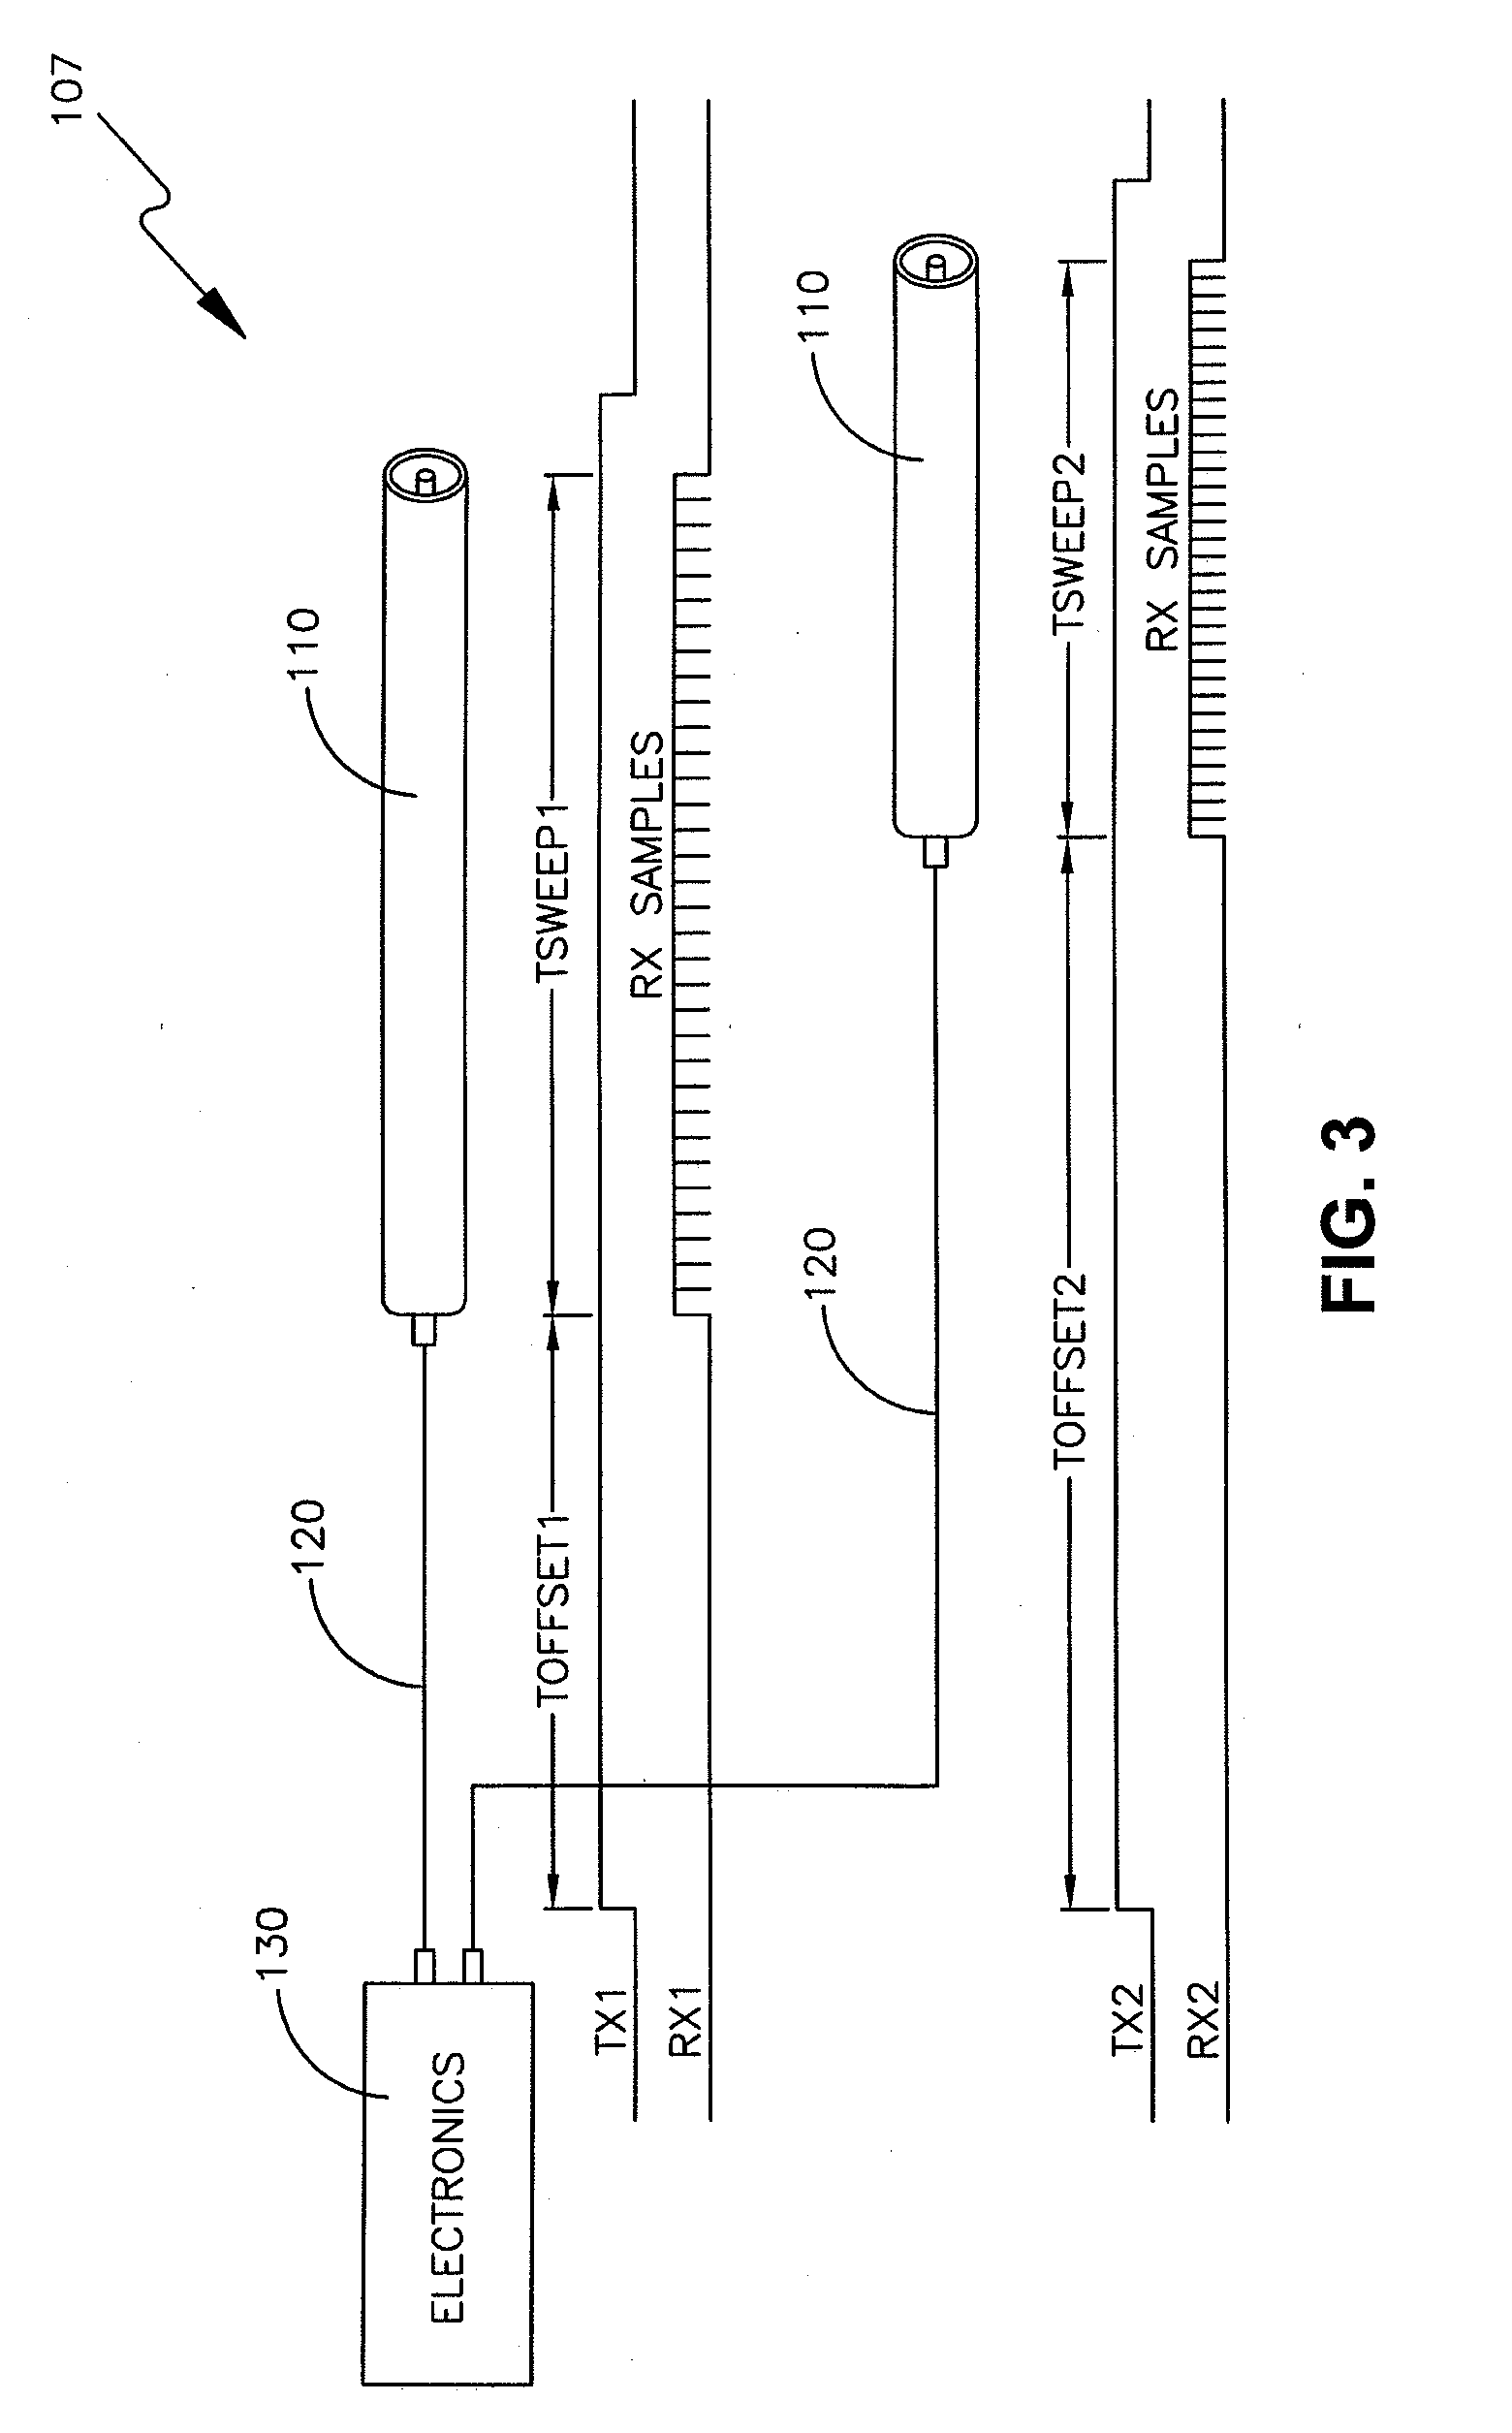 System and method for optimizing sweep delay and aliasing for time domain reflectometric measurement of liquid height within a tank